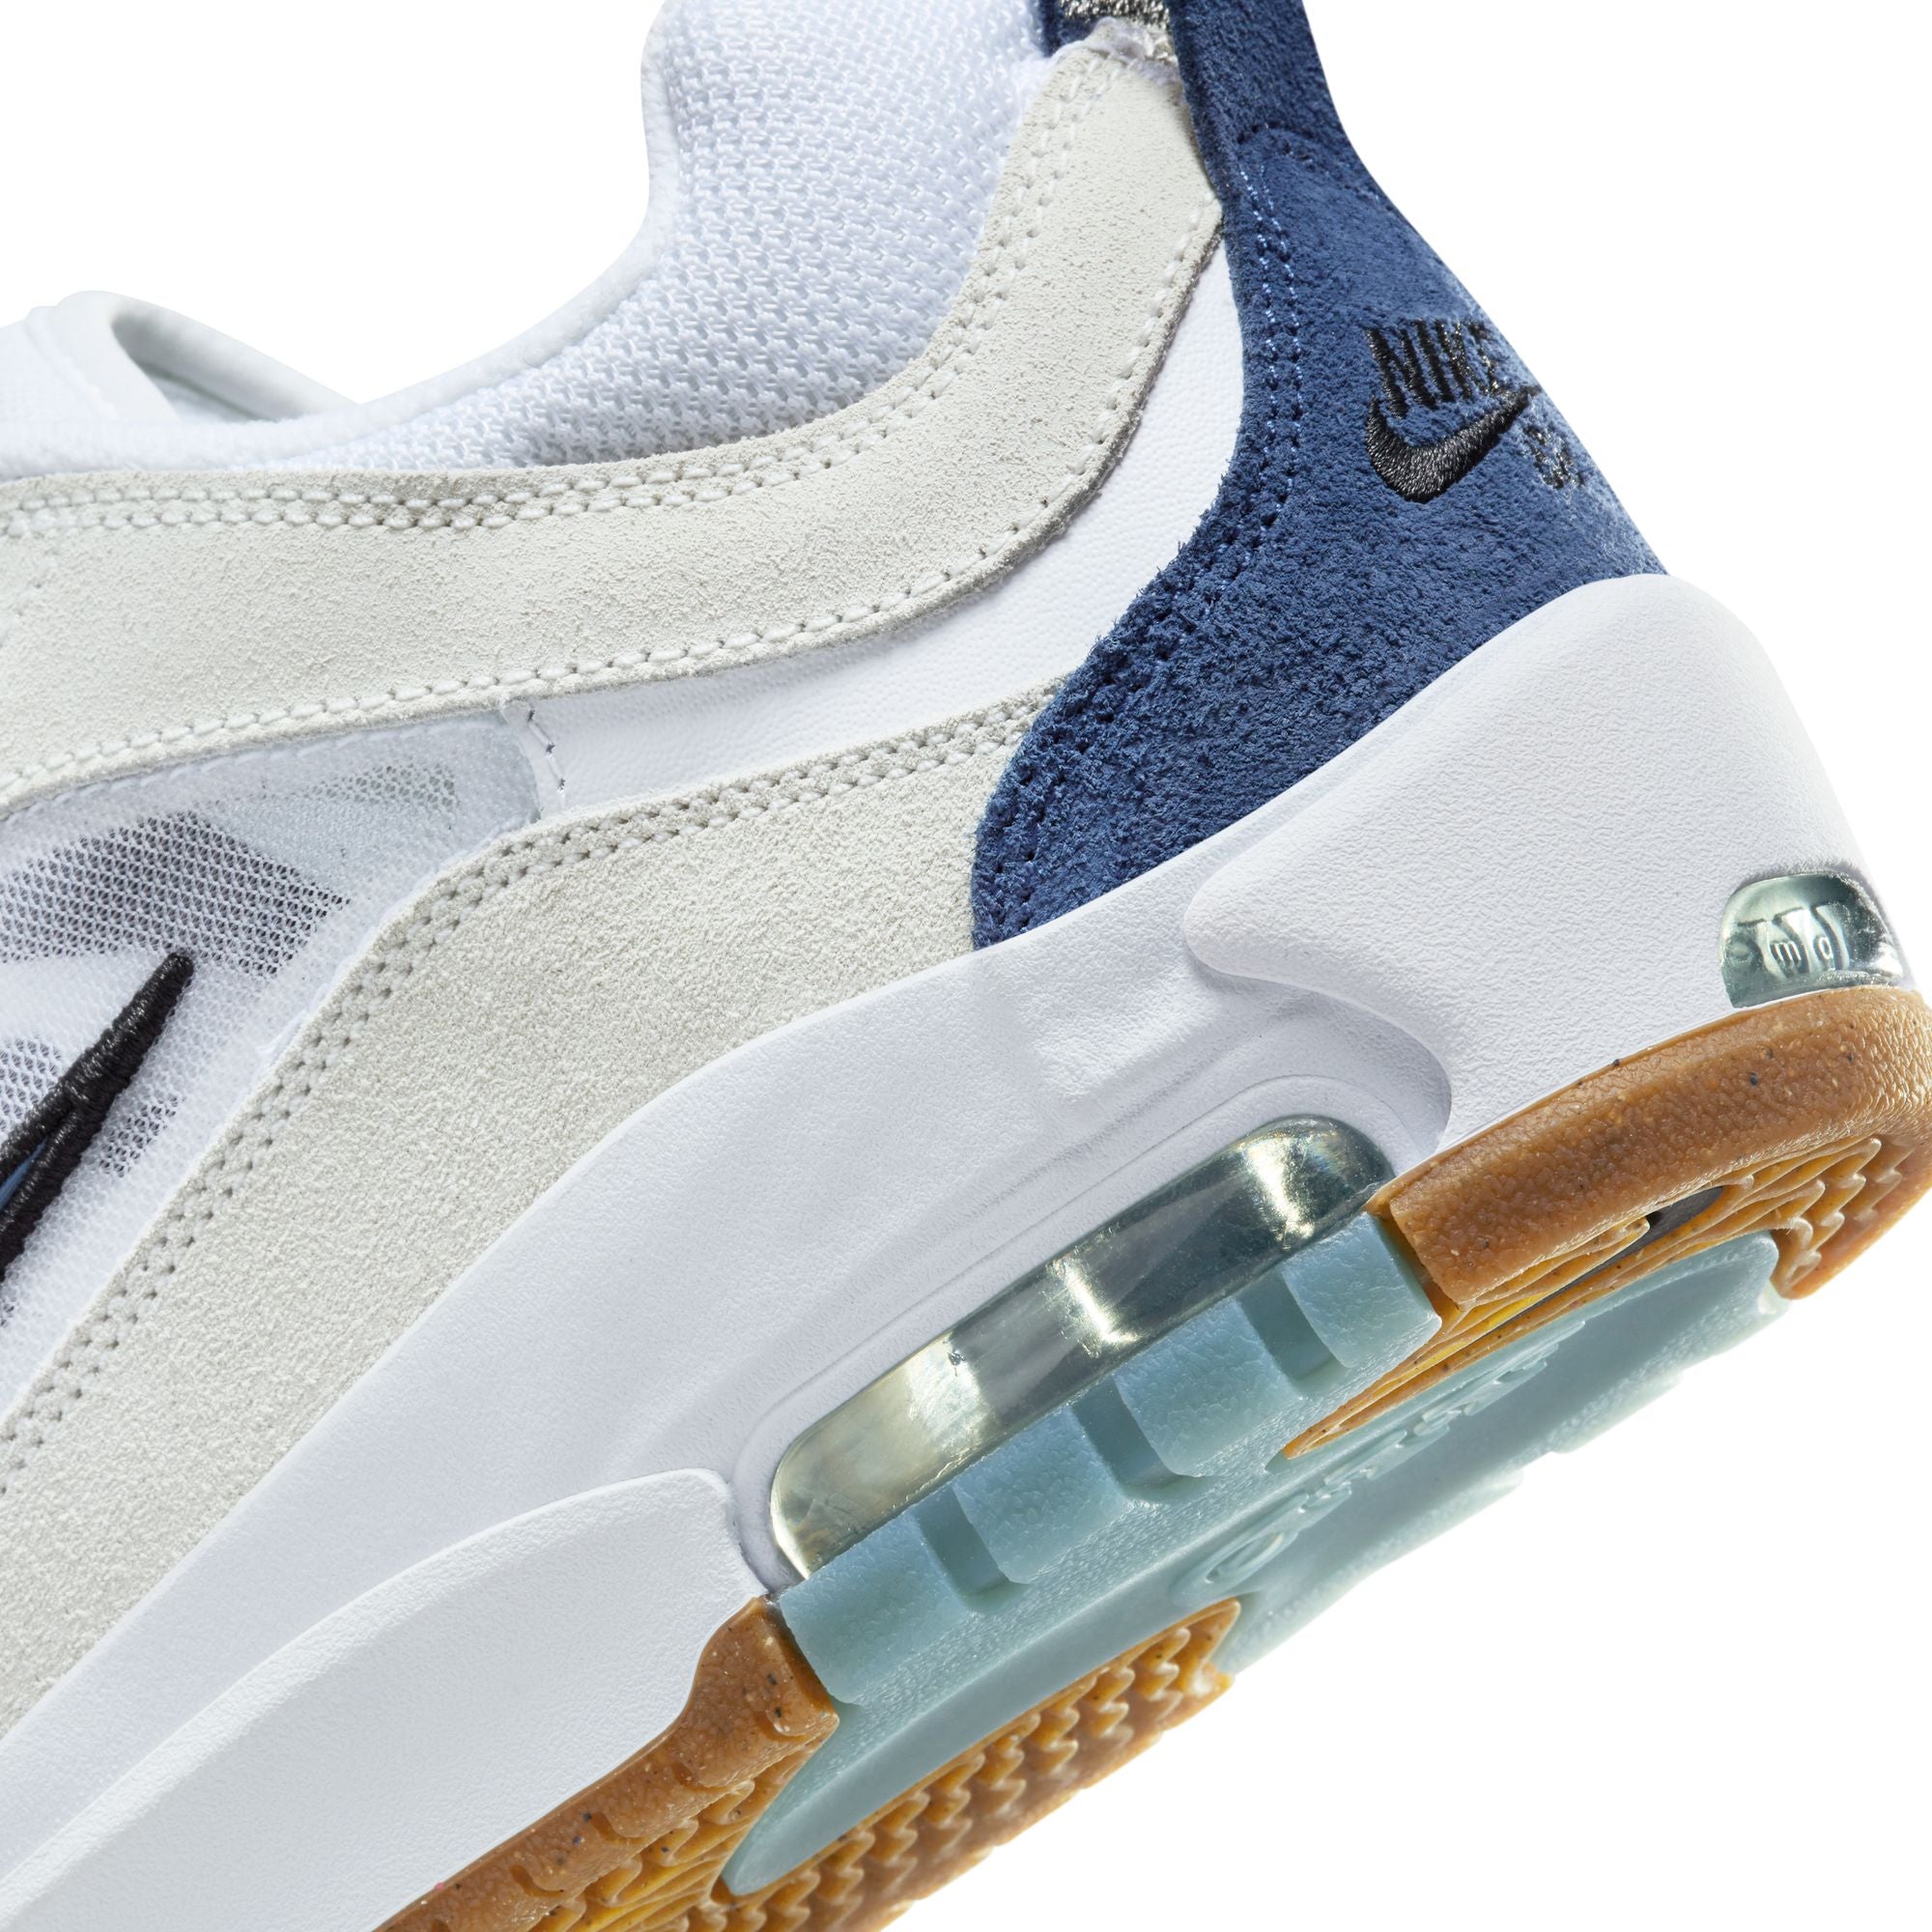 White nike air max Ishod low top shoe with cream and blue suede details and black nike tick. Gum sole. Free uk shipping over £50